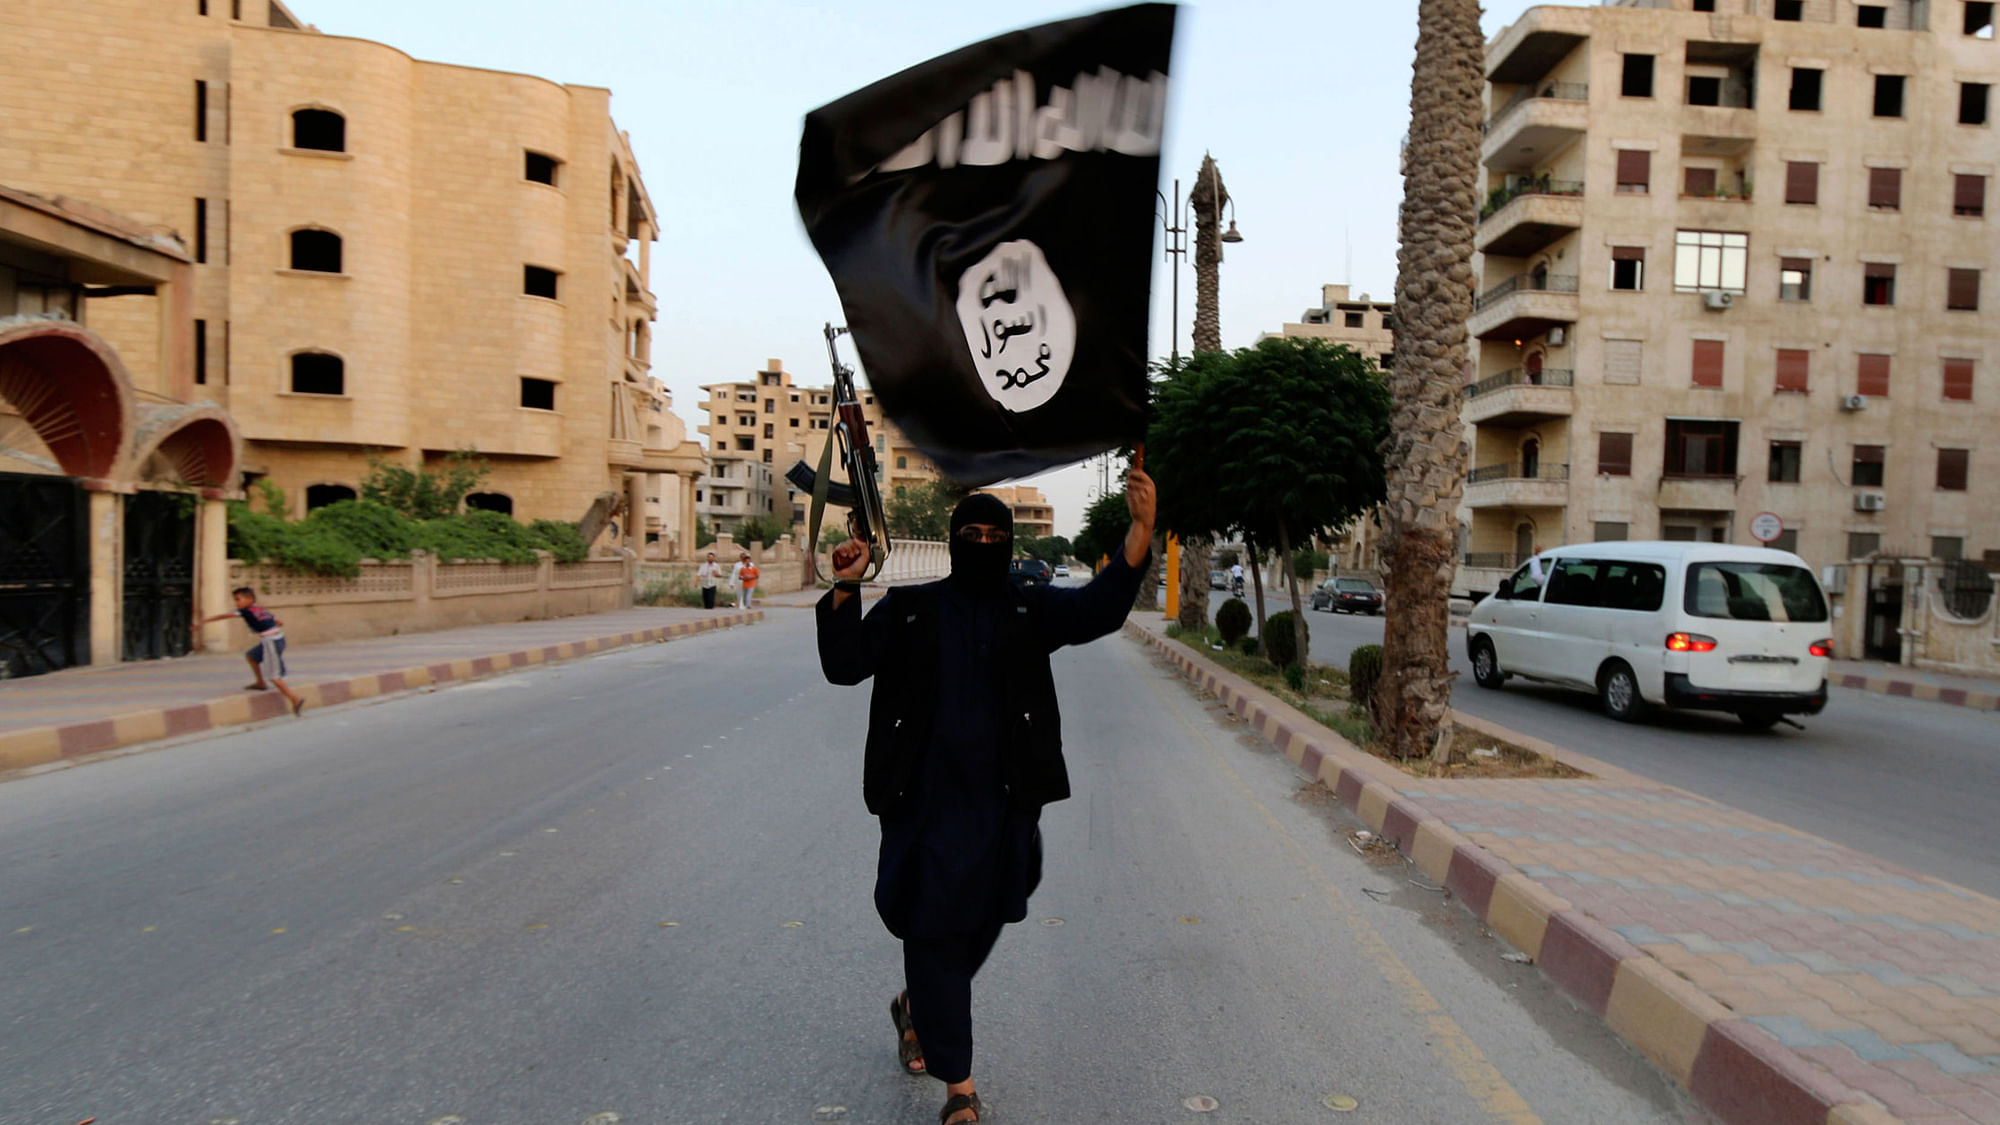 A supporter waving the ISIS flag. (Photo: Reuters)